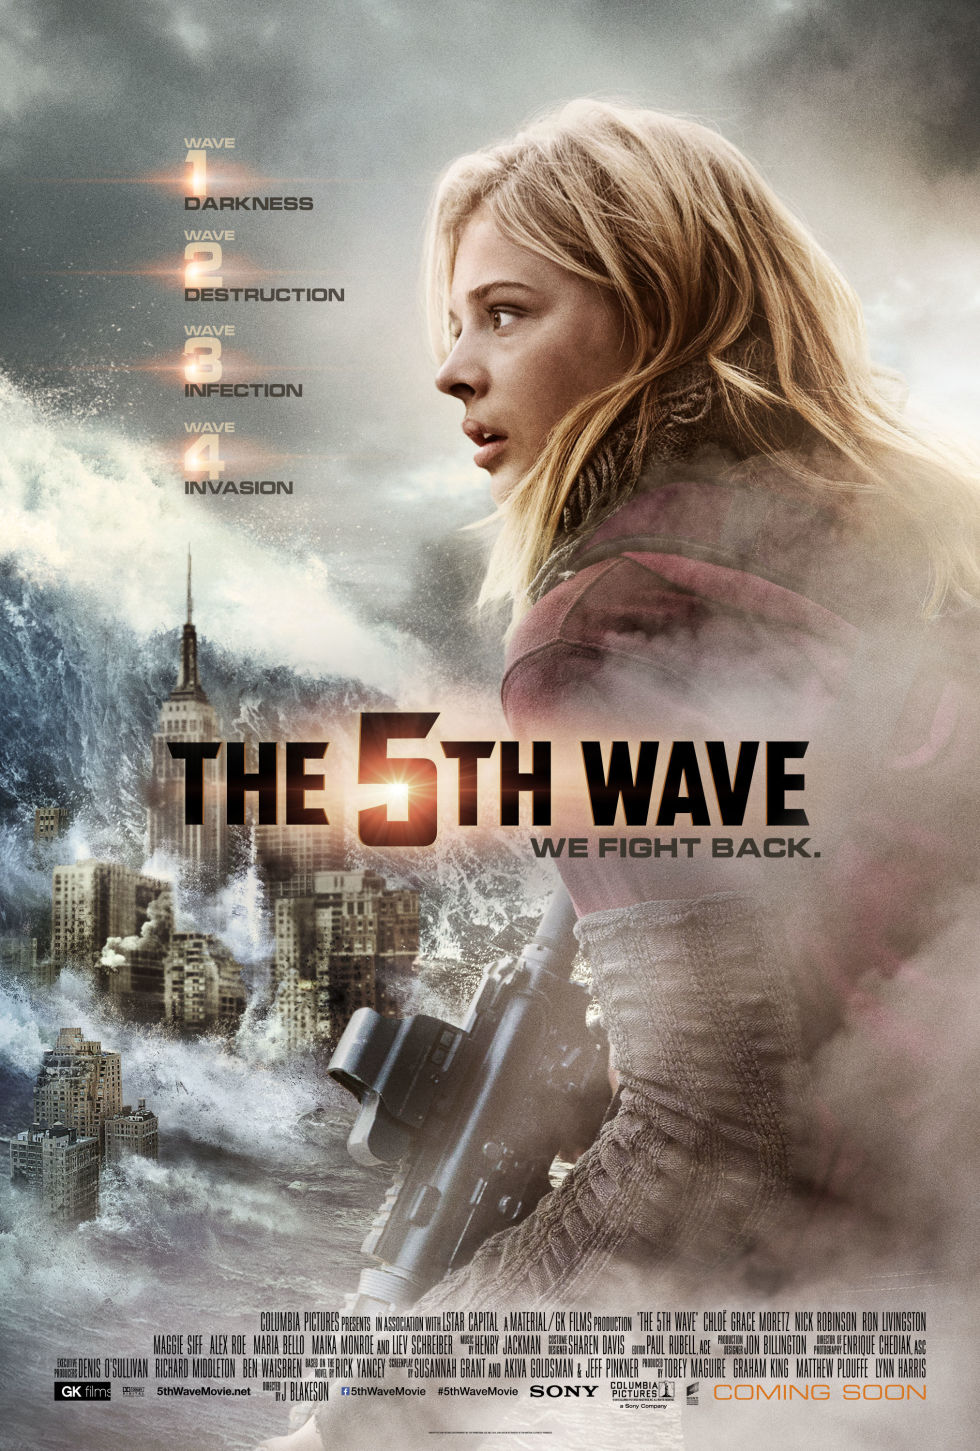 The-5th-wave-international-poster-the-5th-wave-38932387-980-1451